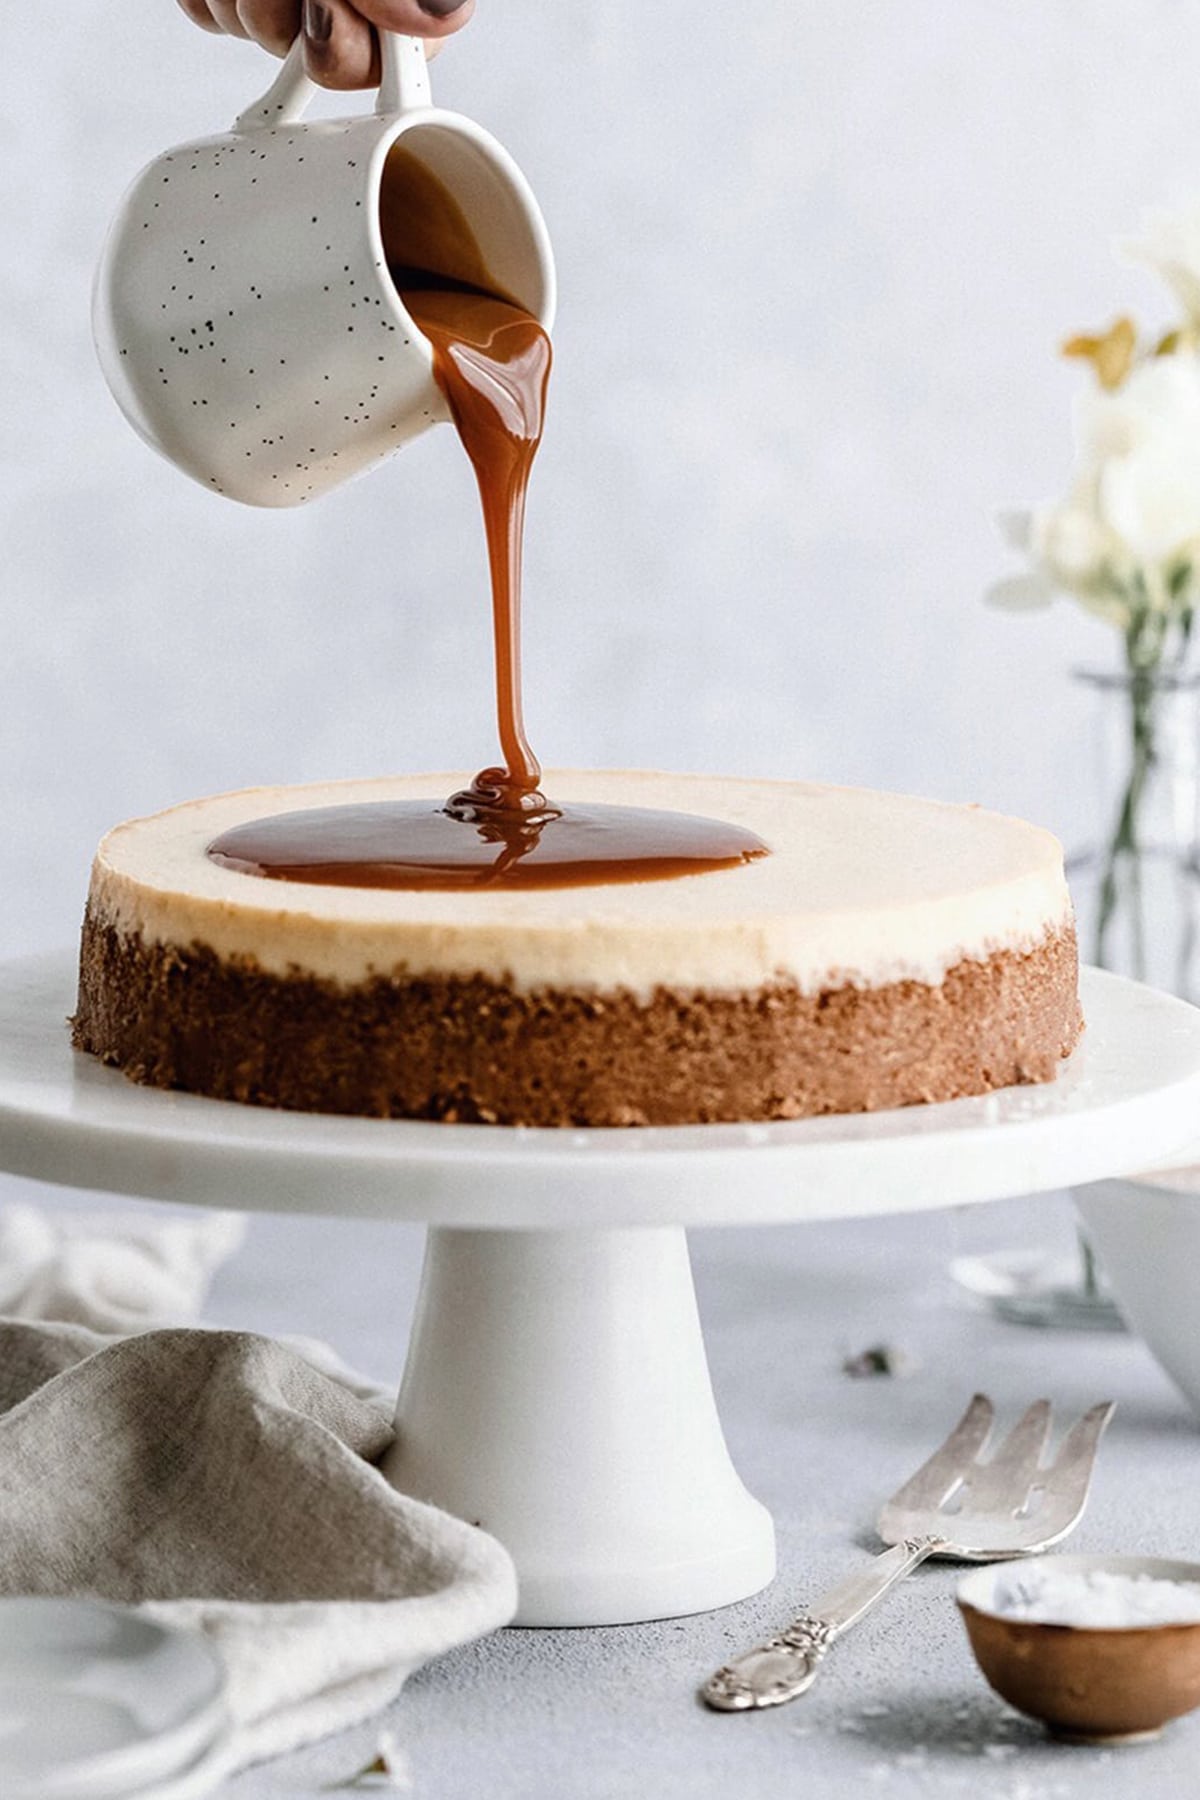 Caramel cheesecake with graham cracker crust and homemade caramel sauce poured on top.